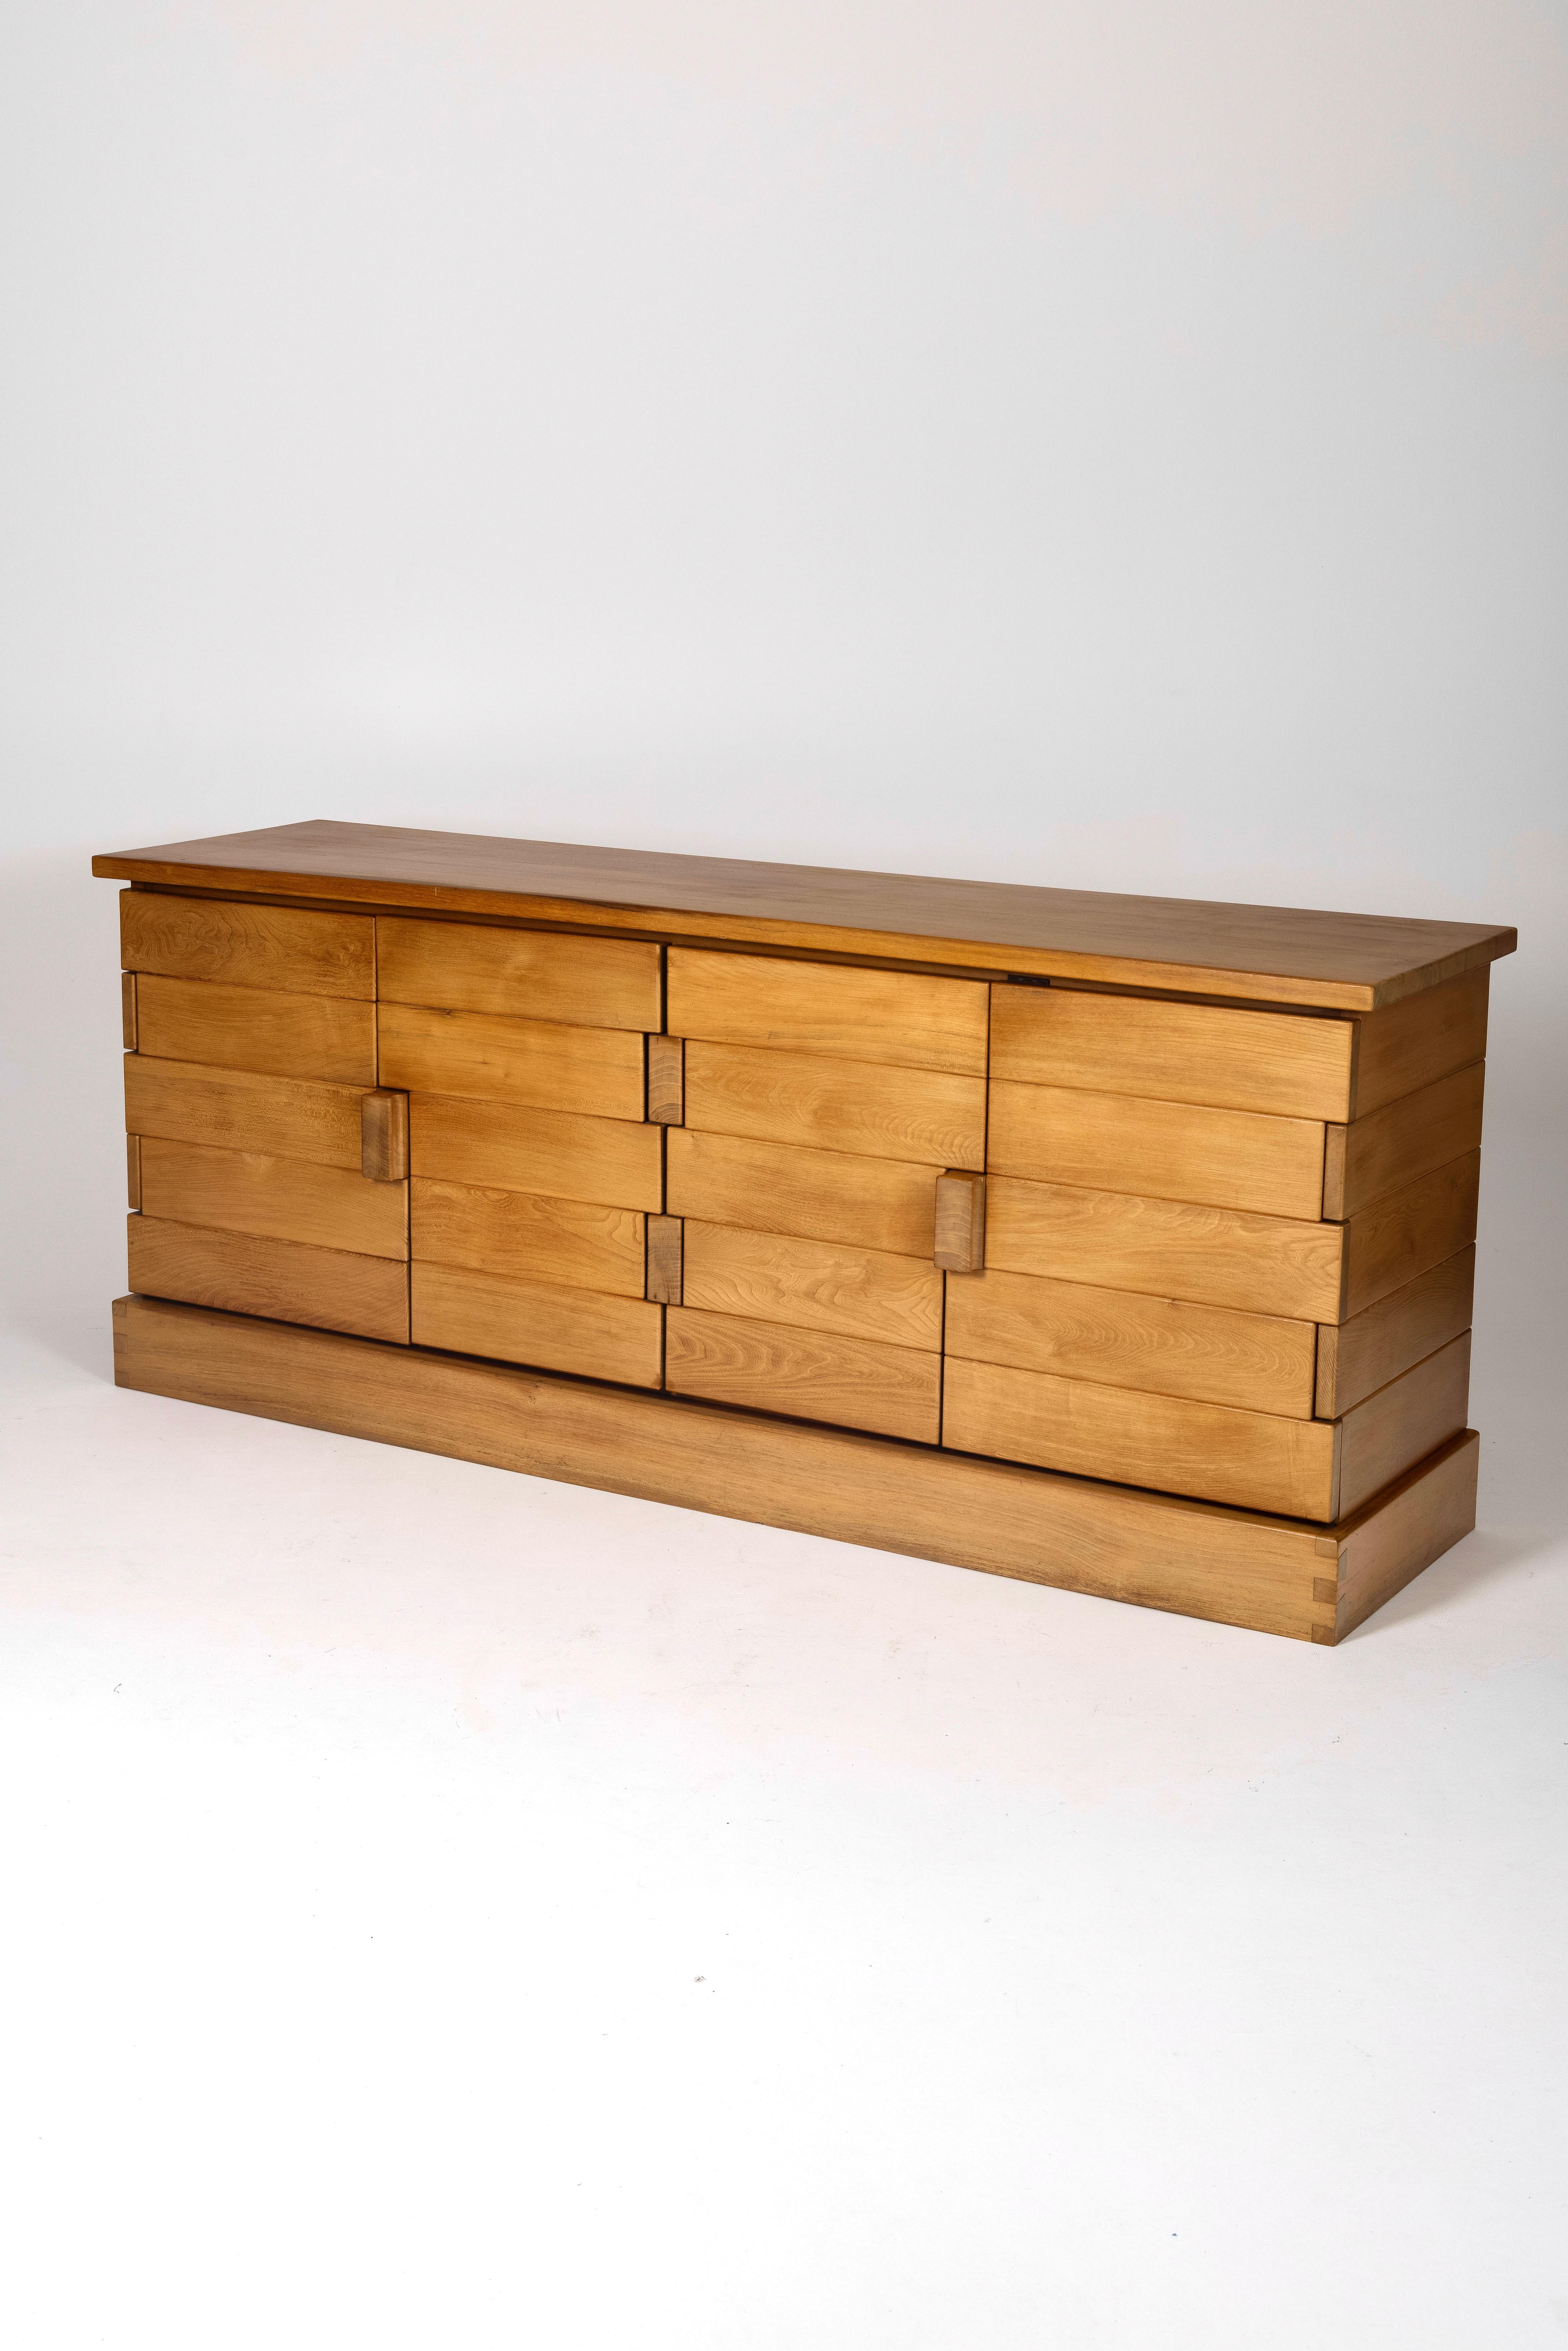 Elm sideboard from Maison Regain, 1960s. It features 4 doors, shelves, and 2 drawers. This sideboard will complement perfectly with furniture by Charlotte Perriand, Christian Durupt, or Pierre Chapo.
LP1464